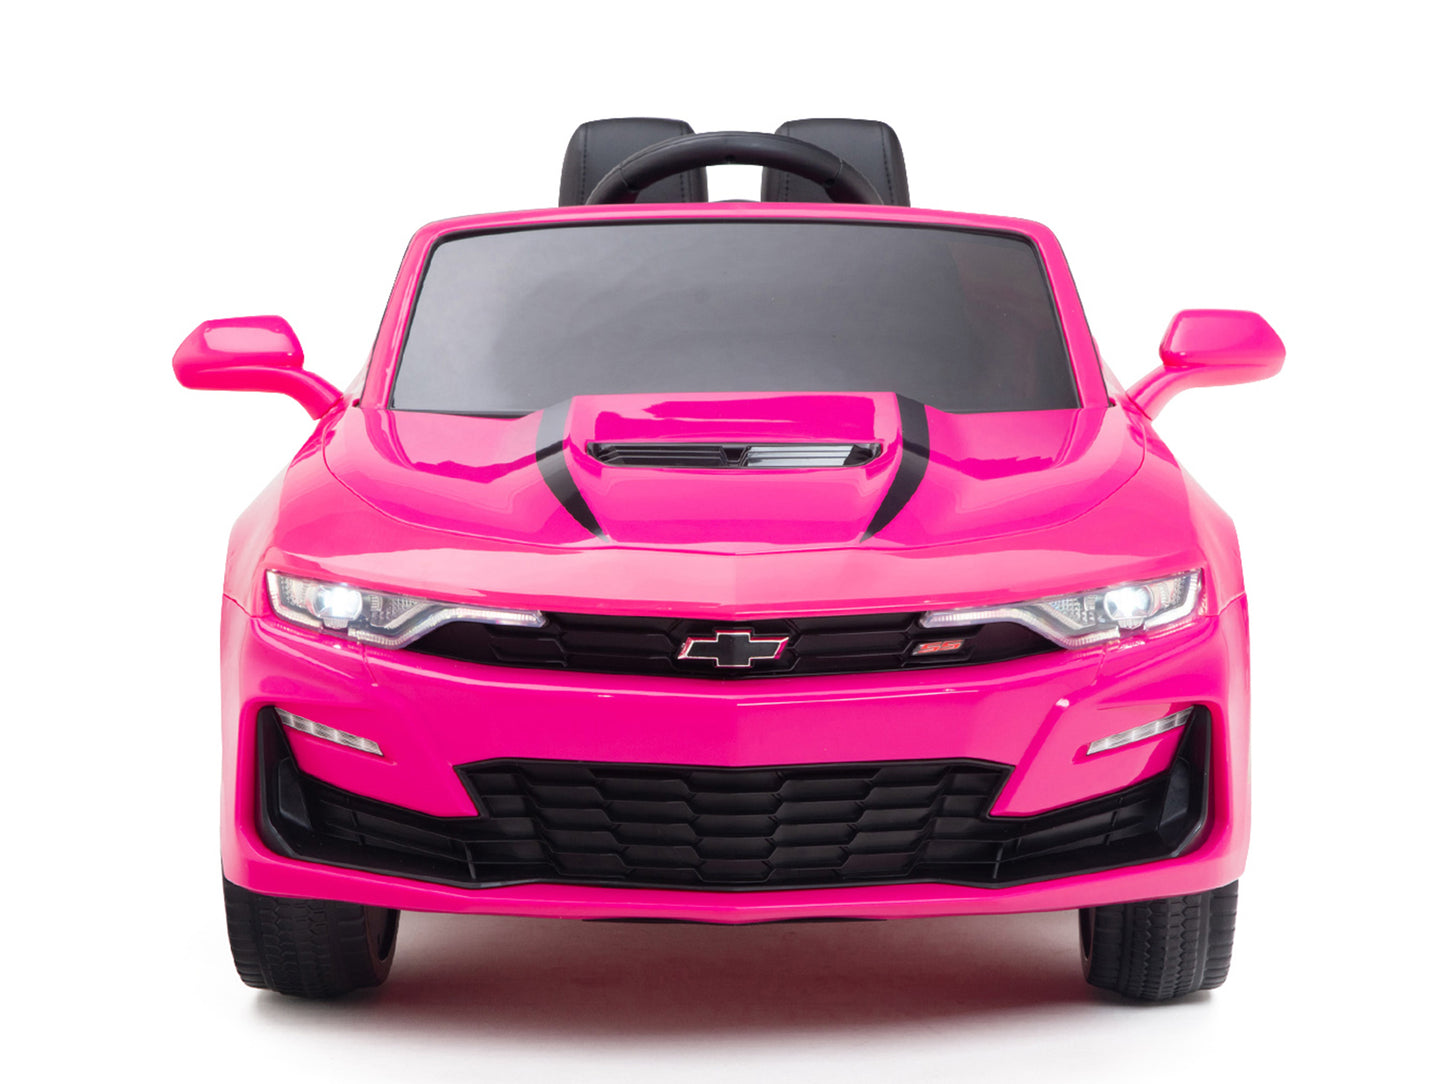 12V Chevrolet Camaro 2SS Kids Ride On Car with Remote Control - Pink